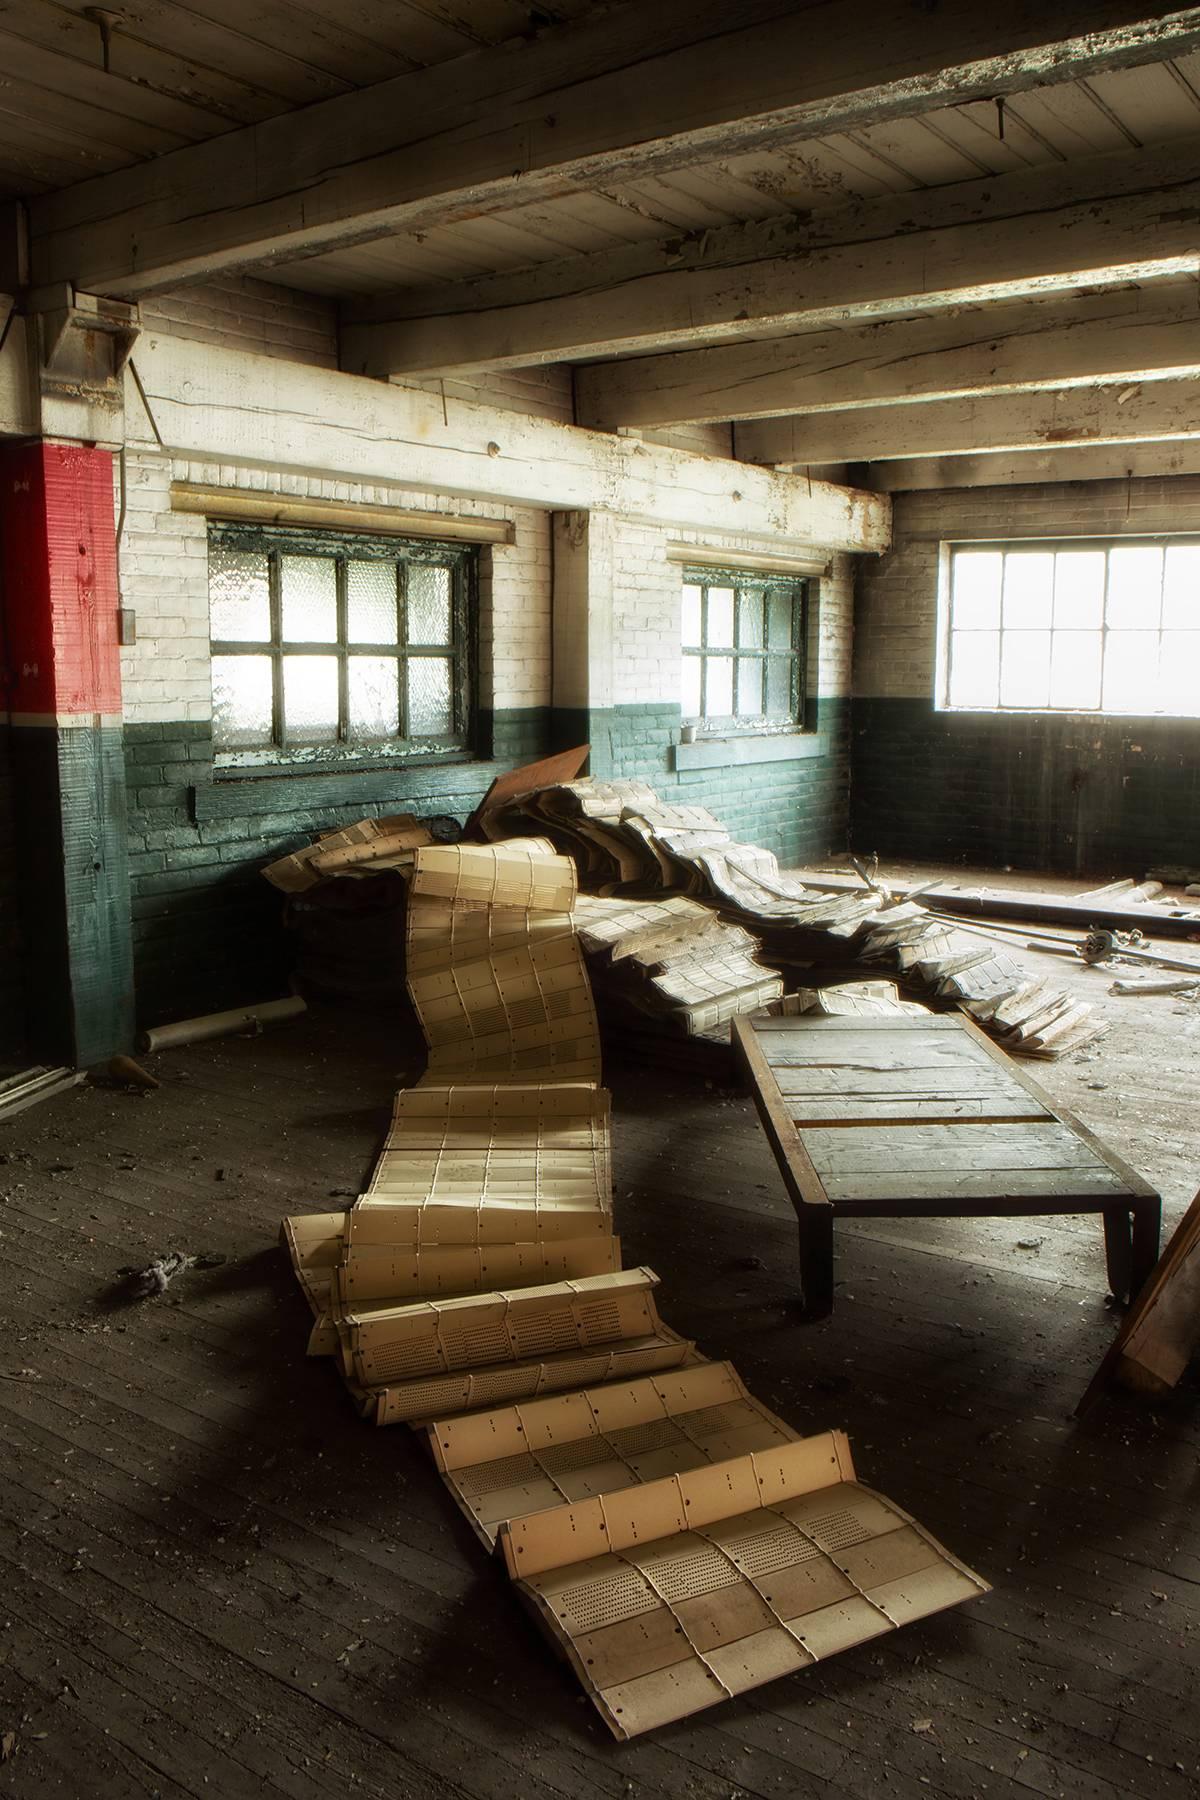 Rebecca Skinner Color Photograph - "Unravel", abandoned, factory, industrial, metal print, color photograph